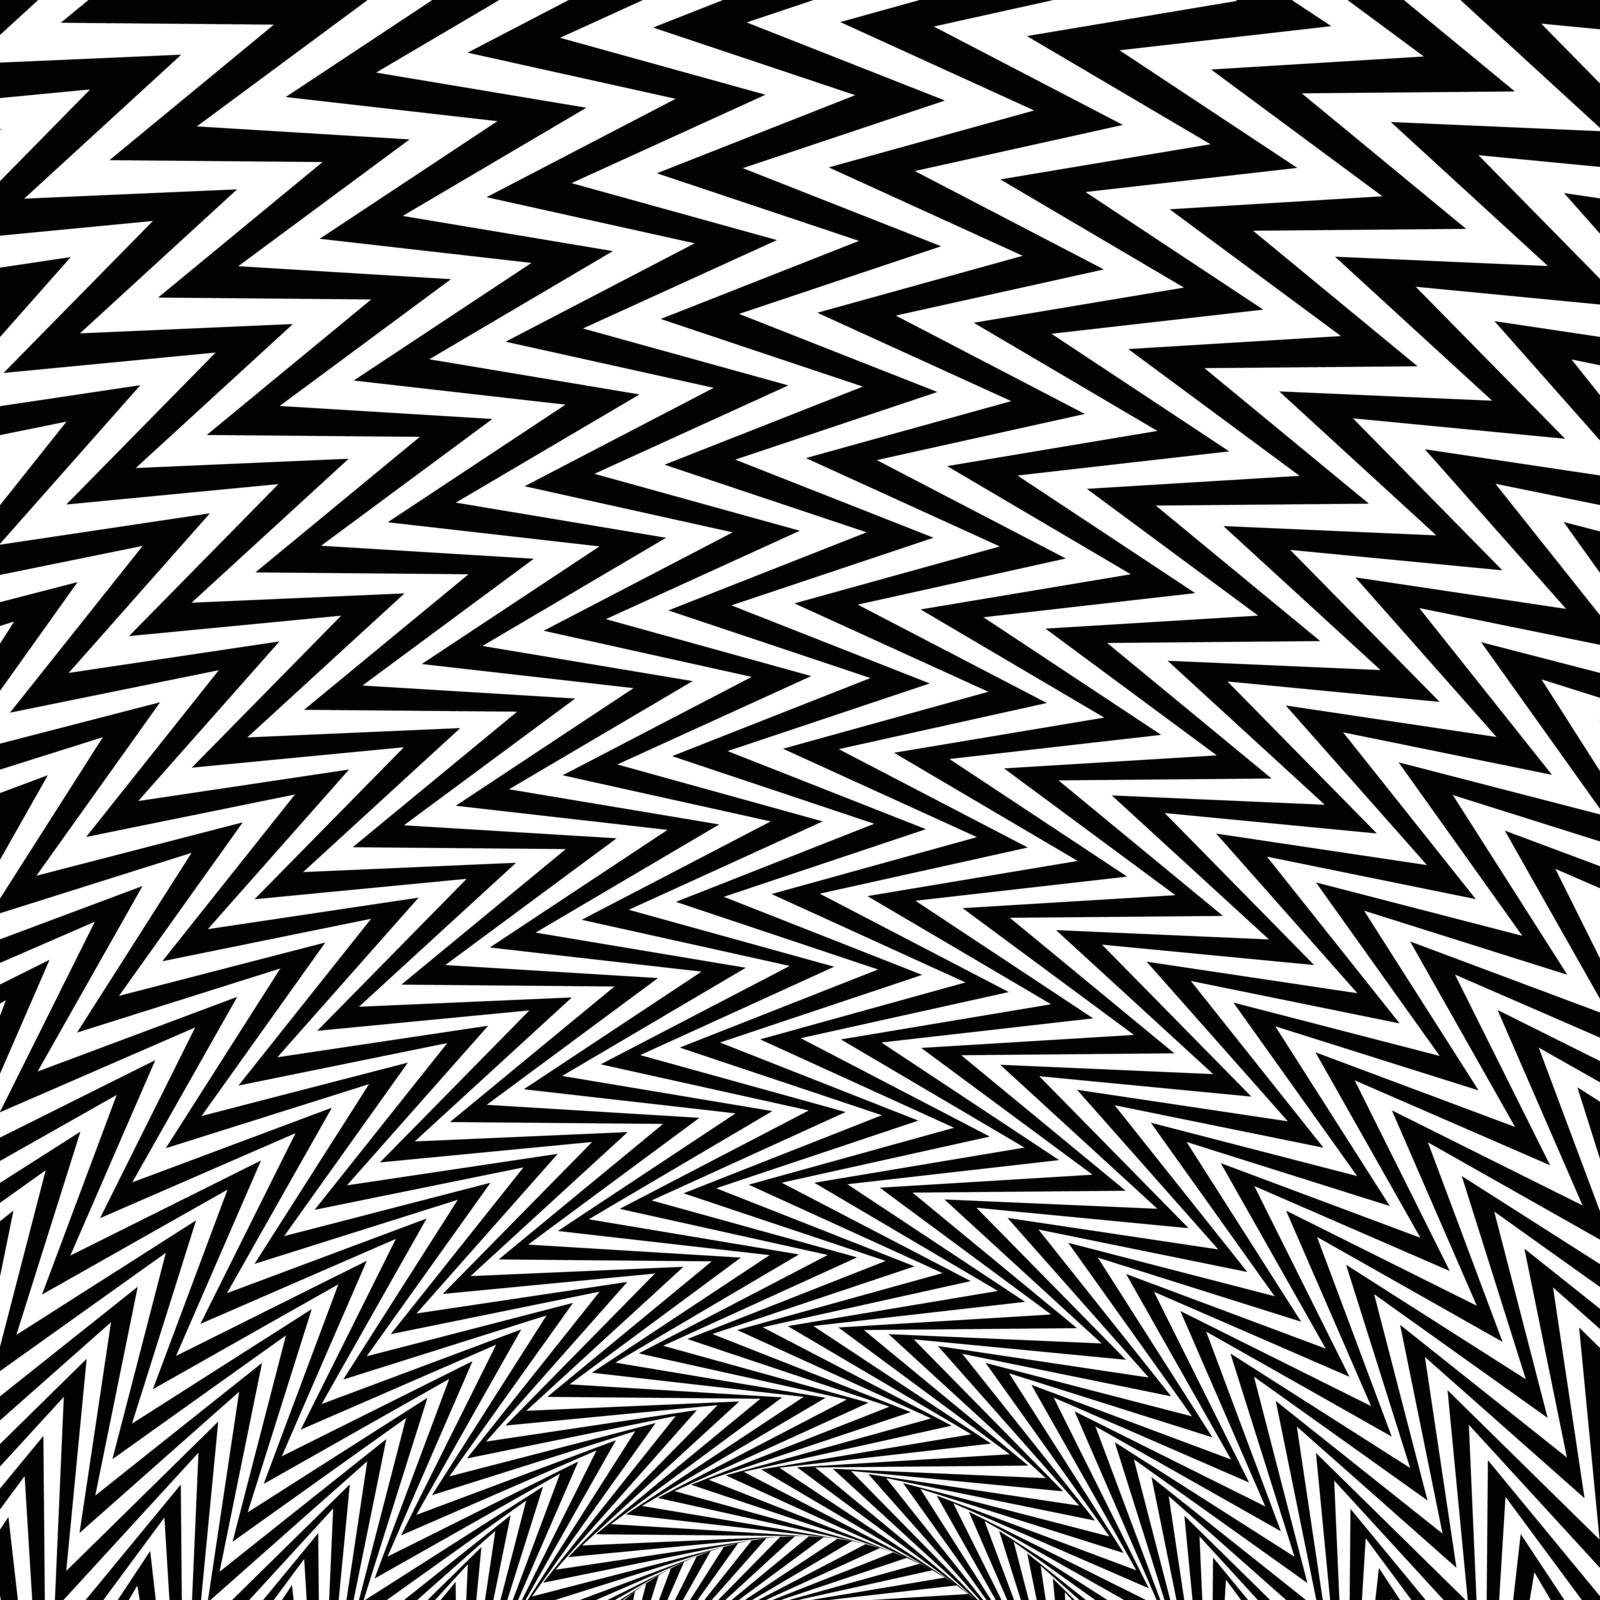 Abstract starburst background with zigzag, wavy lines